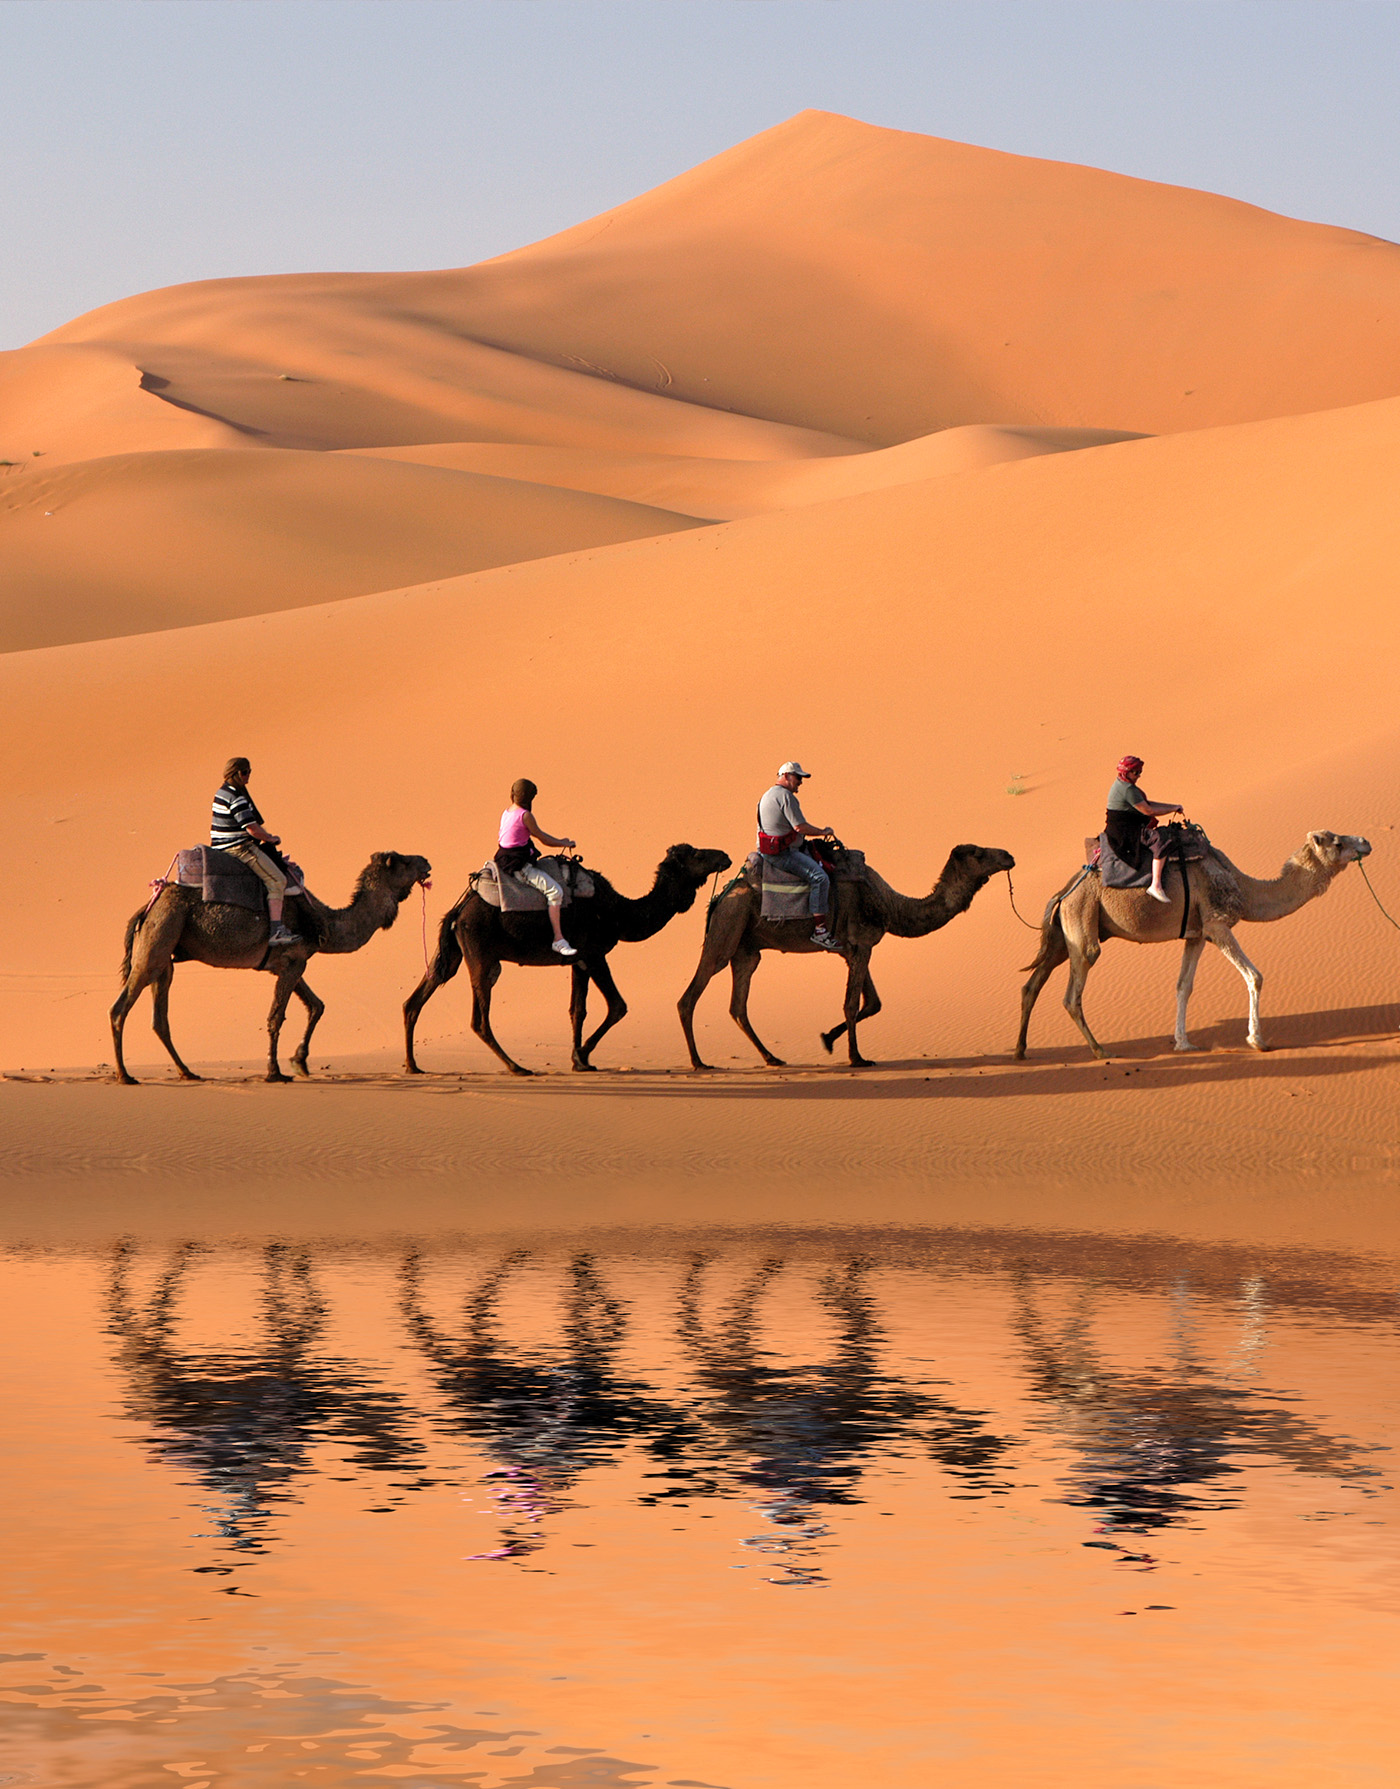 A group traveling on camels in front of majestic sand dunes.